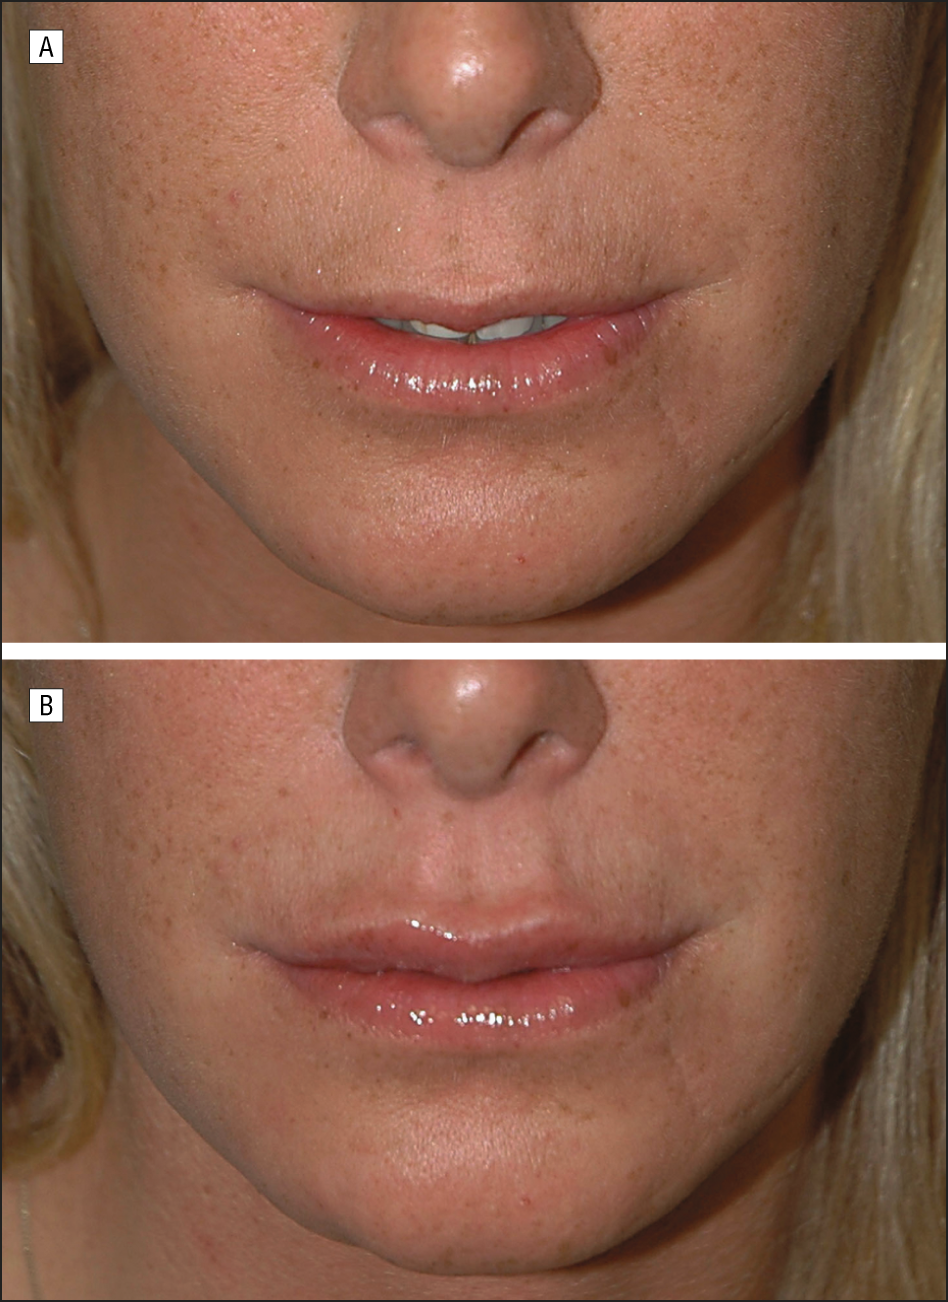 A New Classification Of Lip Zones To Customize Injectable 